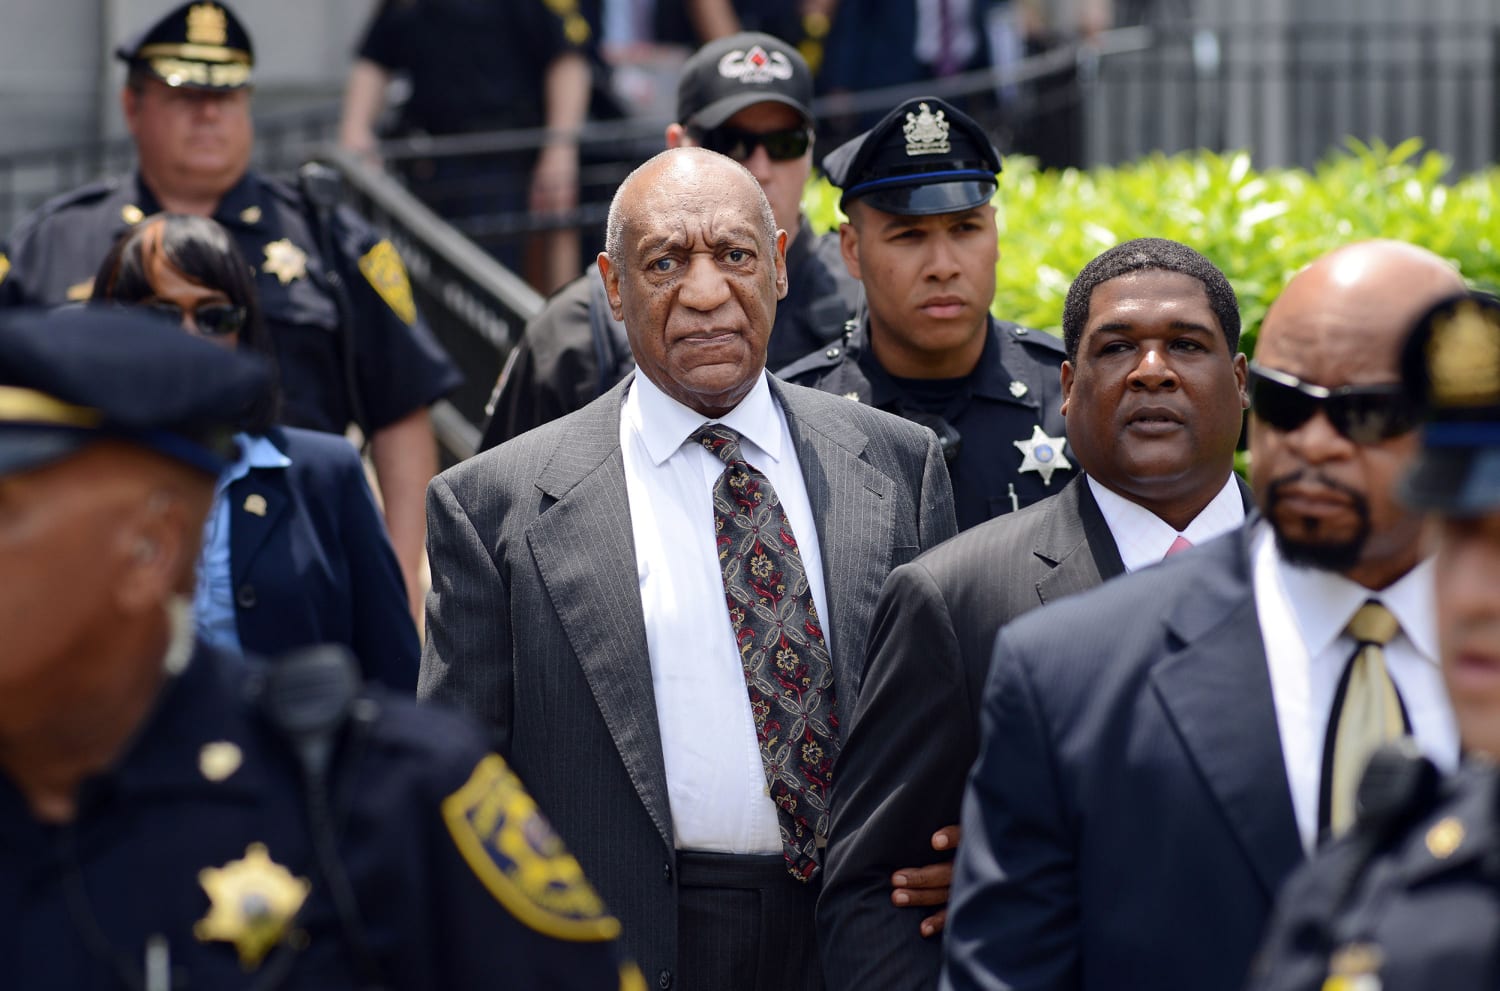 Bill Cosby prosecutors ask Supreme Court to review decision to overturn conviction